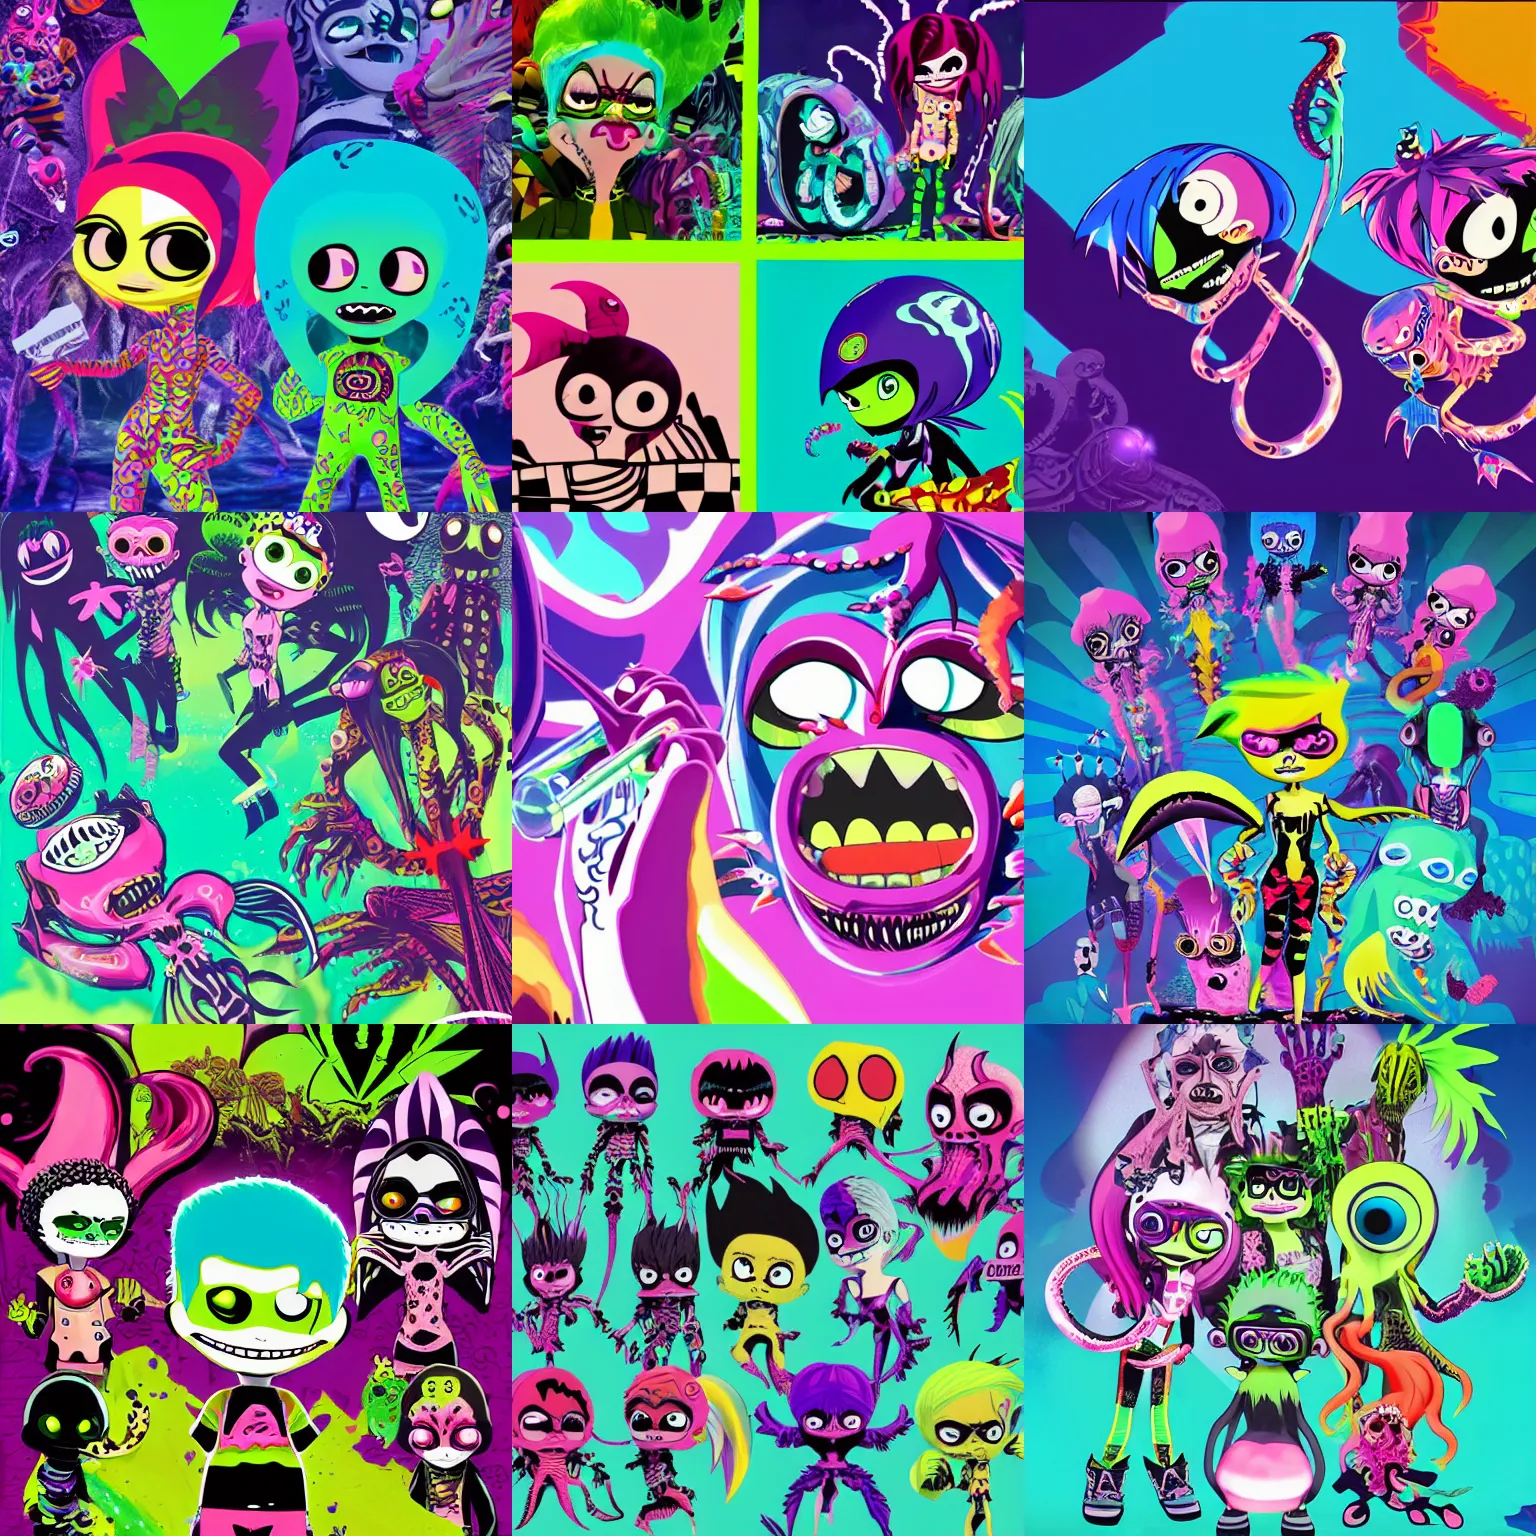 Prompt: CGI lisa frank gothic punk vampiric electrifying underwater vampiric squid character designs of various shapes and sizes by genndy tartakovsky and the creators of fret nice being overseen by Jamie Hewlett from gorillaz for a splatoon game by nintendo